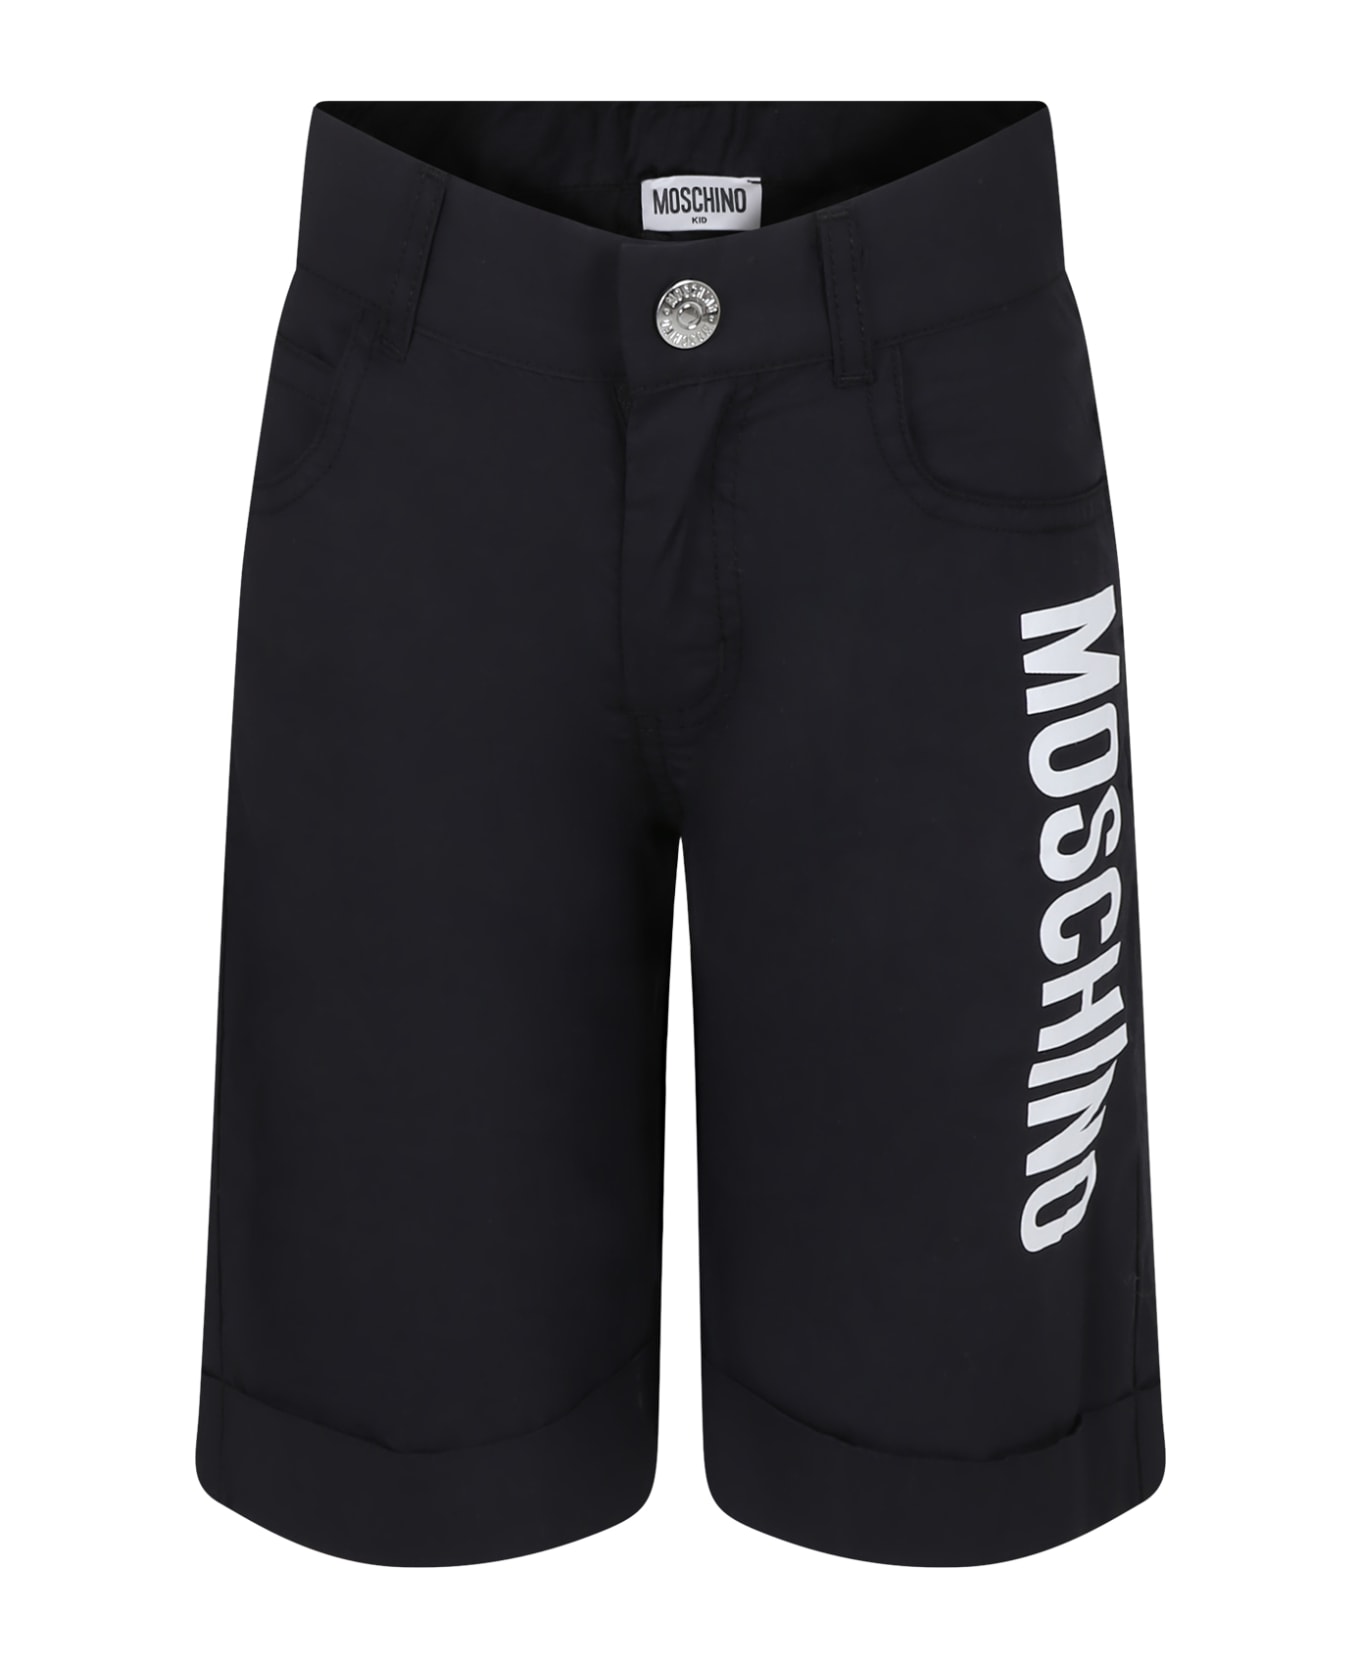 Moschino Black Shorts For Kids With Logo - Black ボトムス